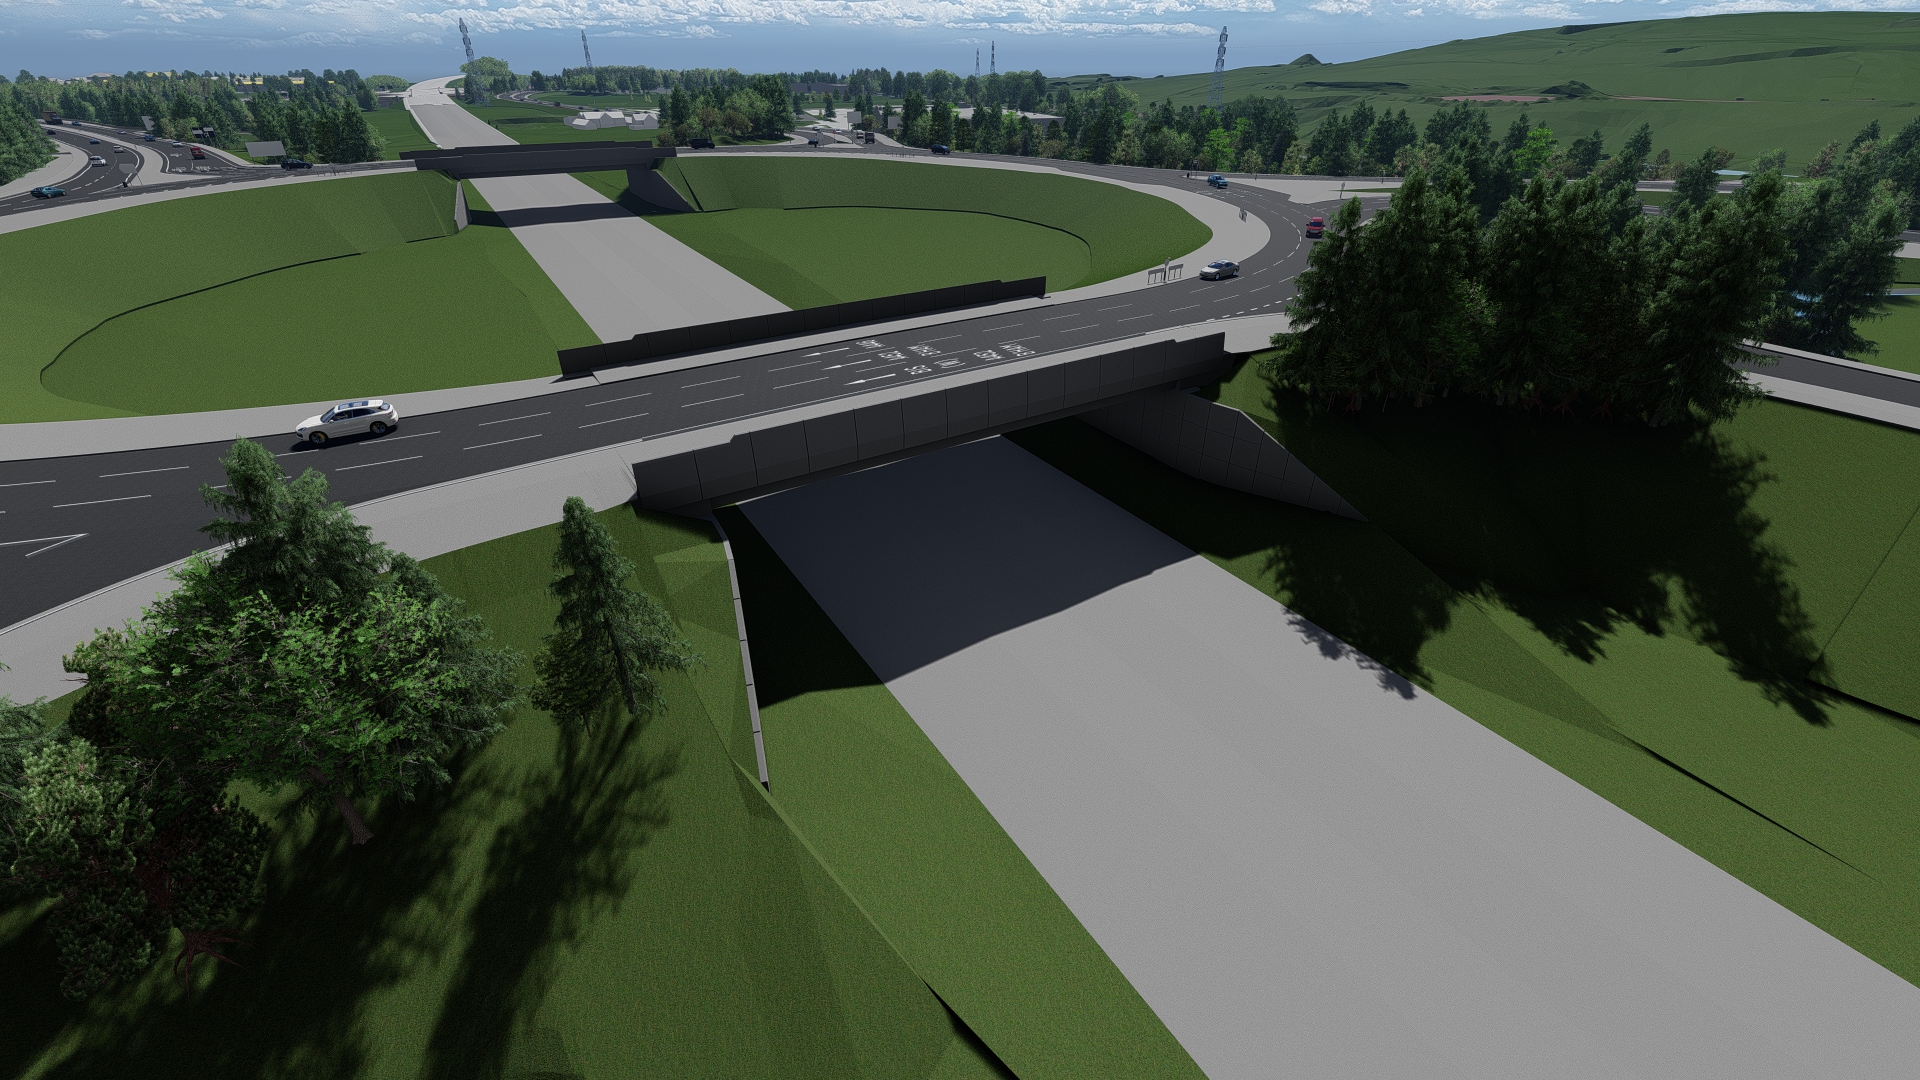 An artist’s impression of the access route to the new HS2 Interchange Station and the Arden Cross development site